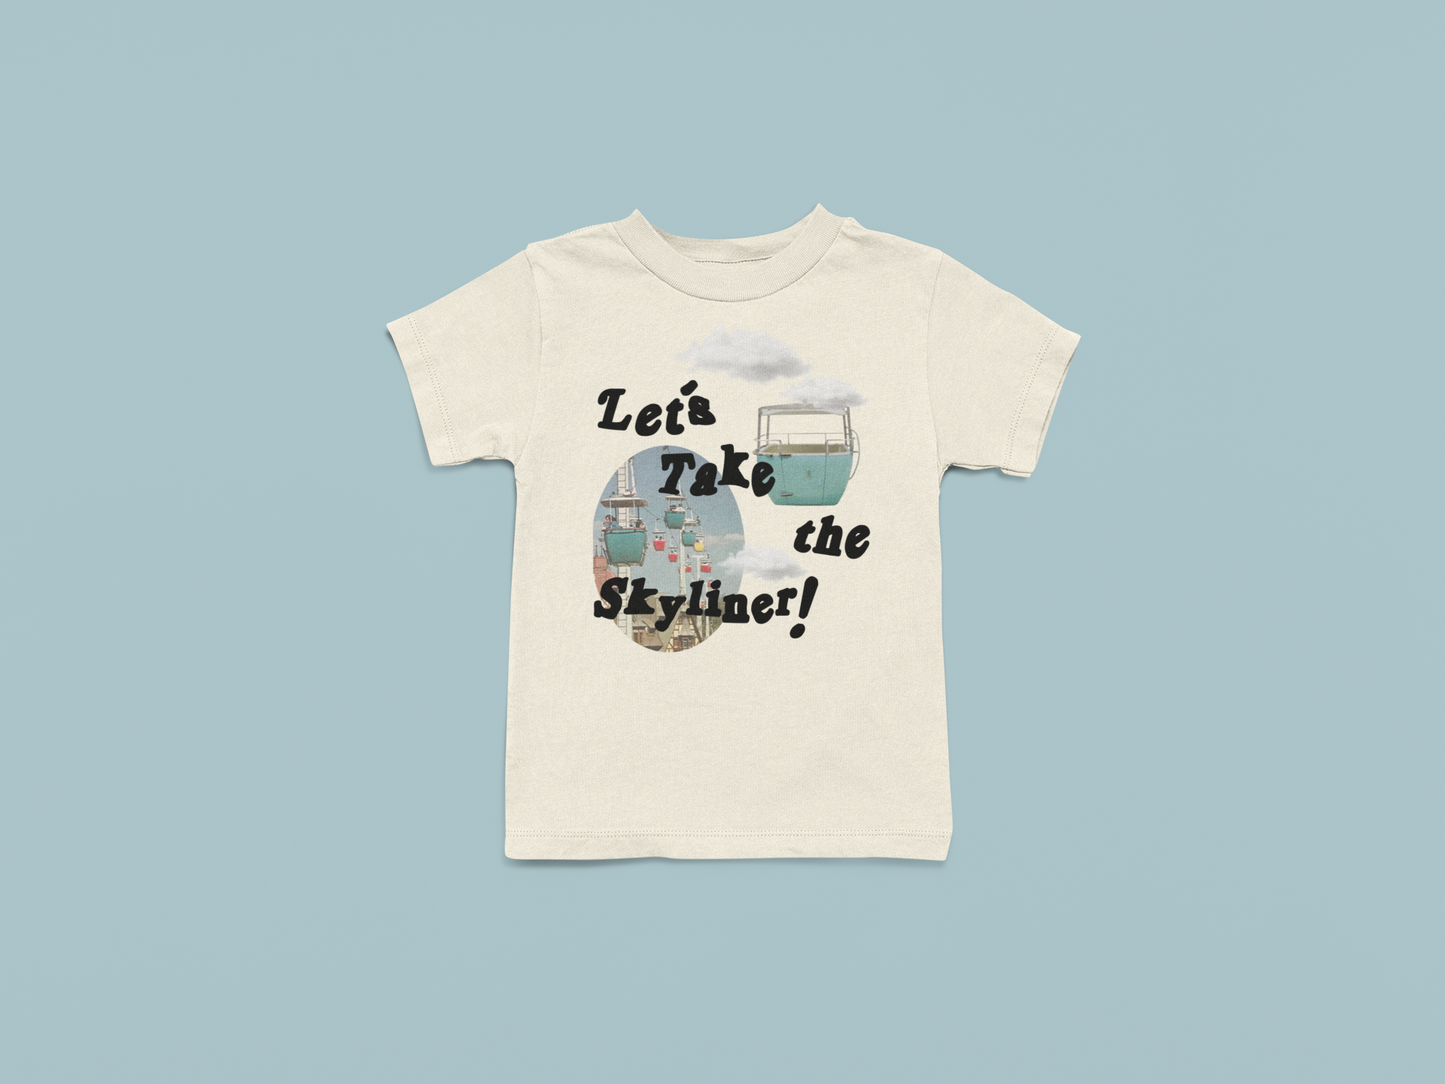 Let's Take the Skyliner Tee